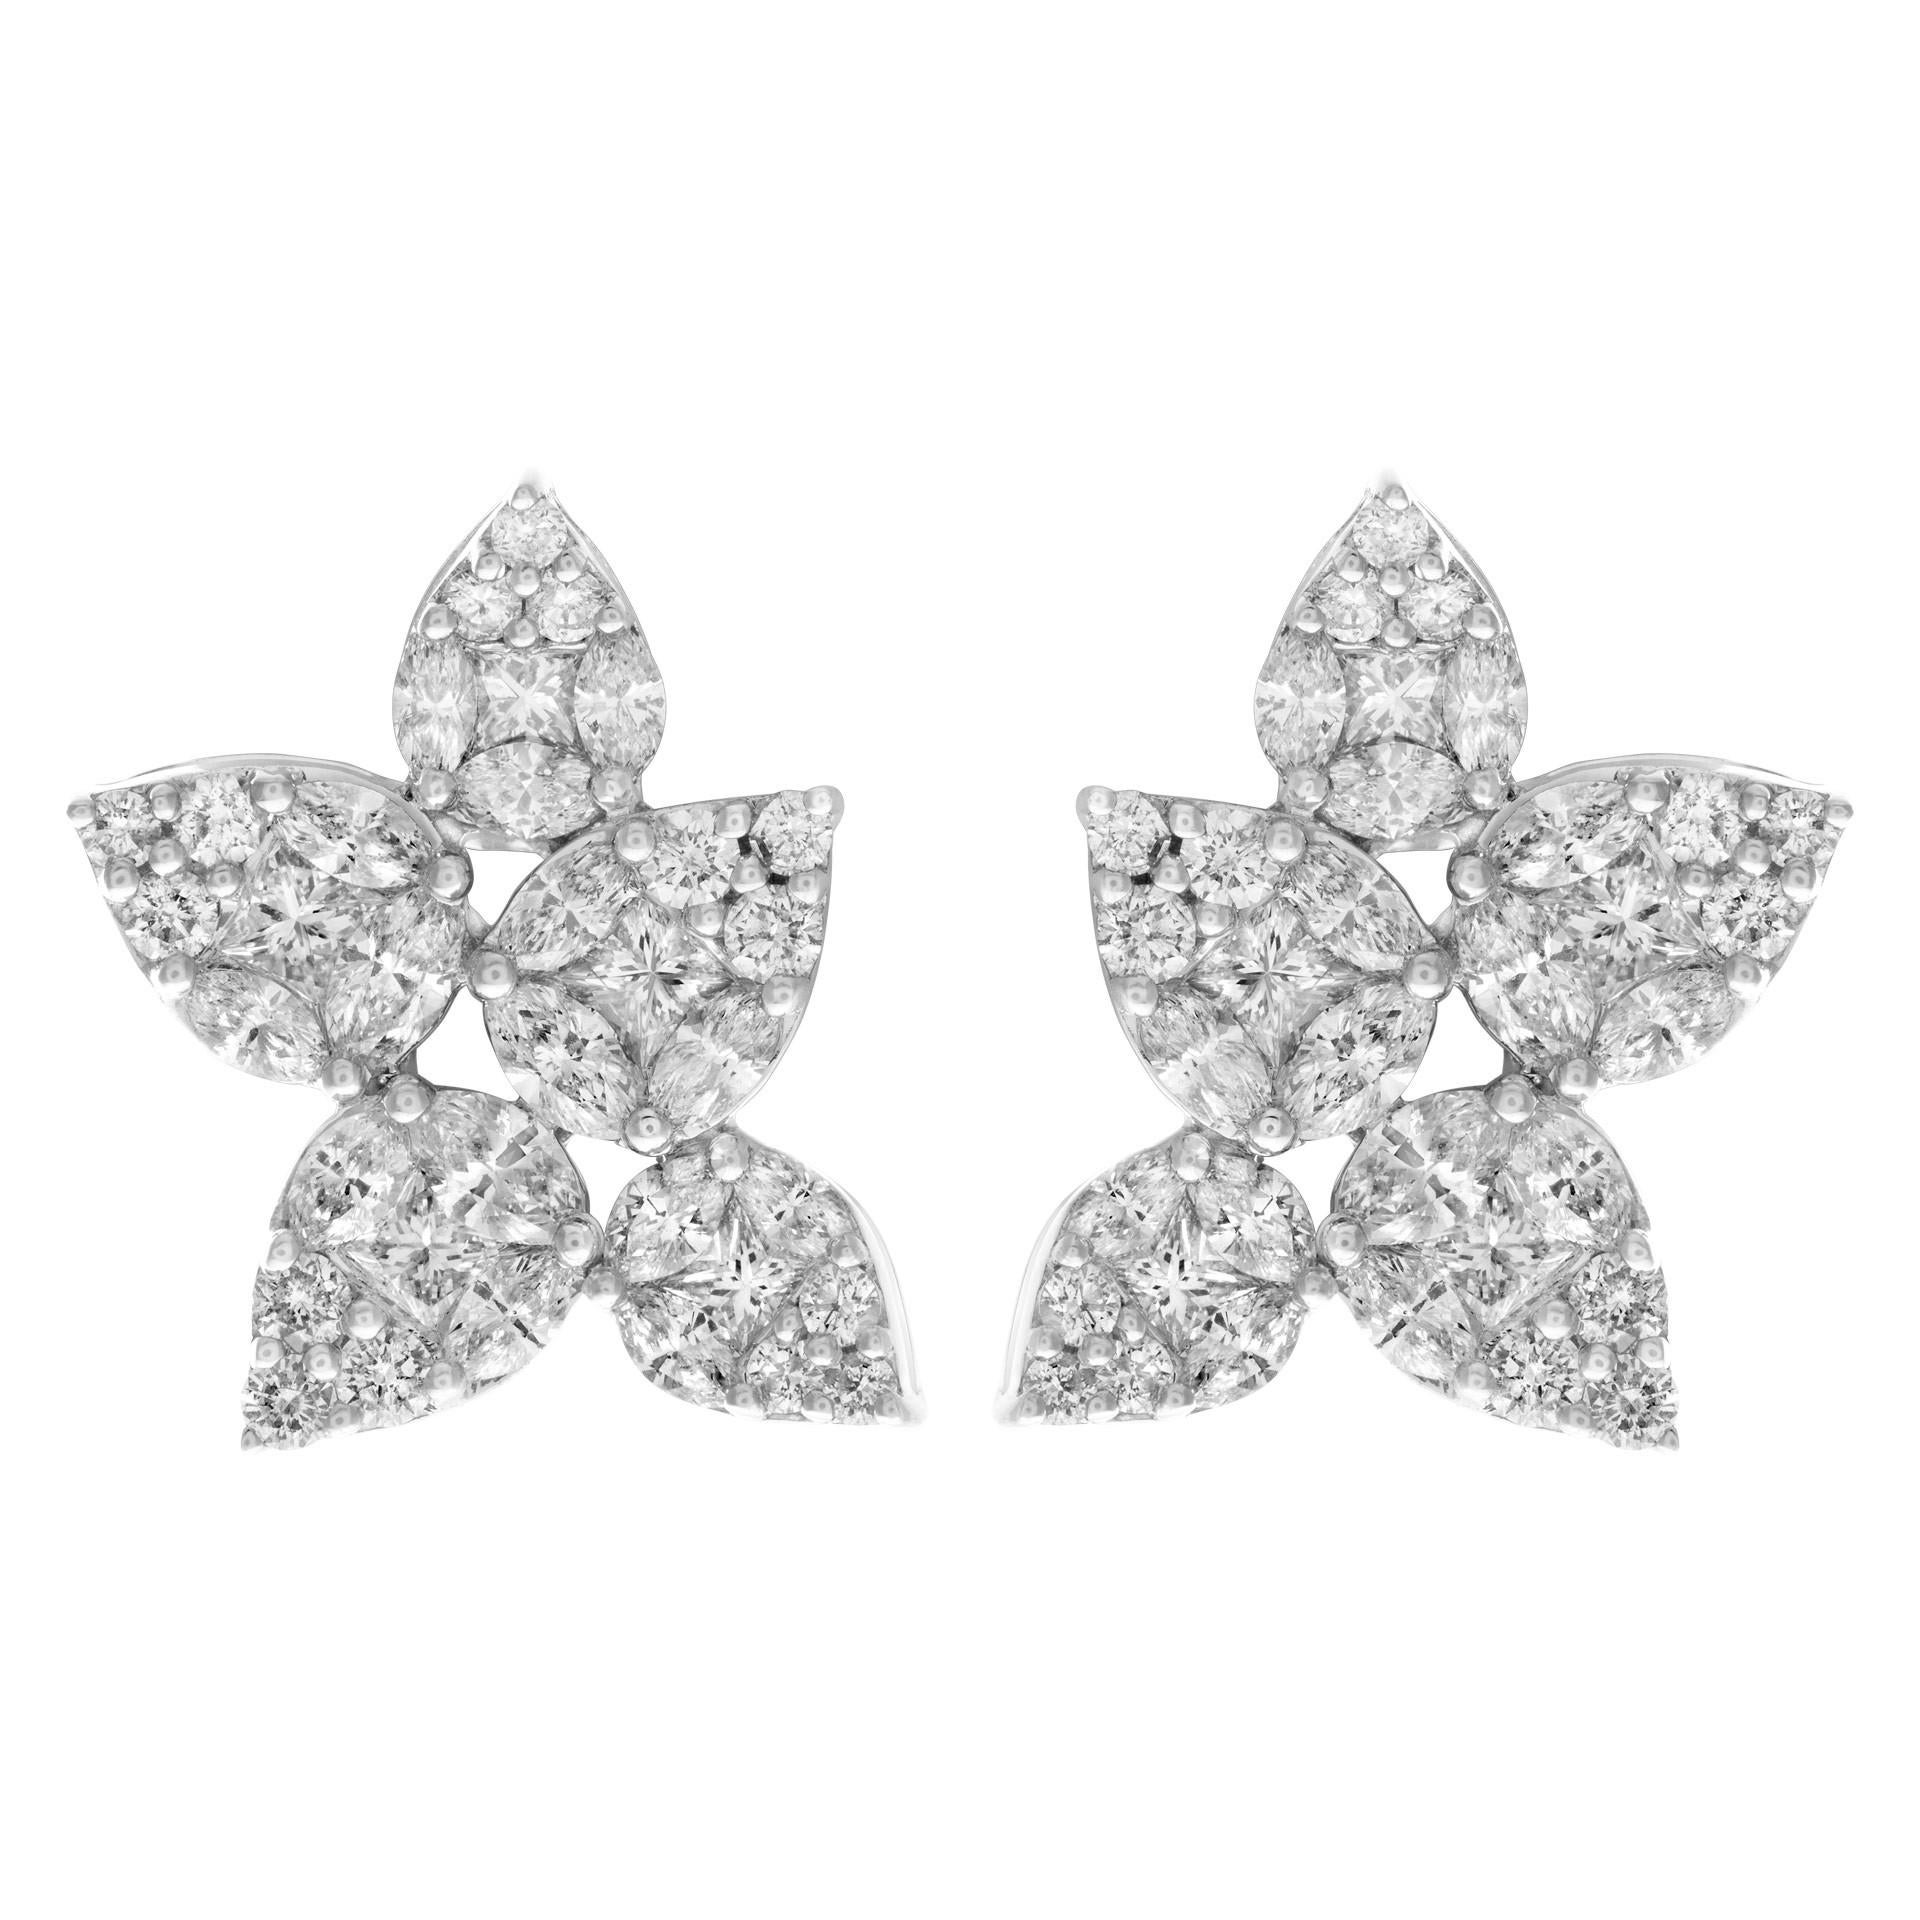 Princess Cut Invisible Set Princess & Round Cut Diamonds Flower Earrings in 18k White Gold